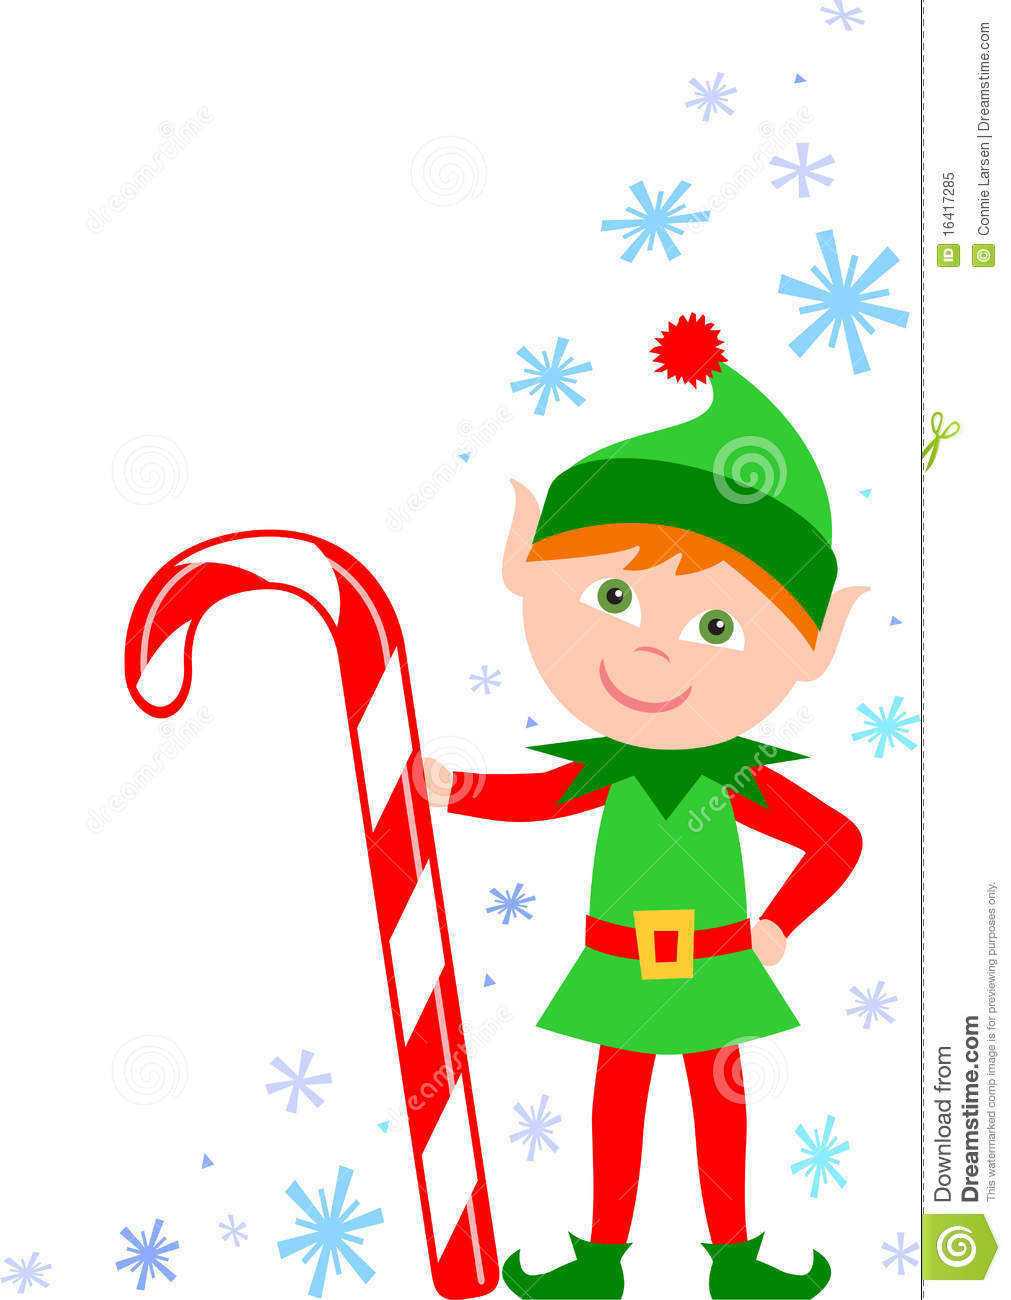 Illustration Of A Cute Christmas Elf With A Candy Cane   One Of A Set